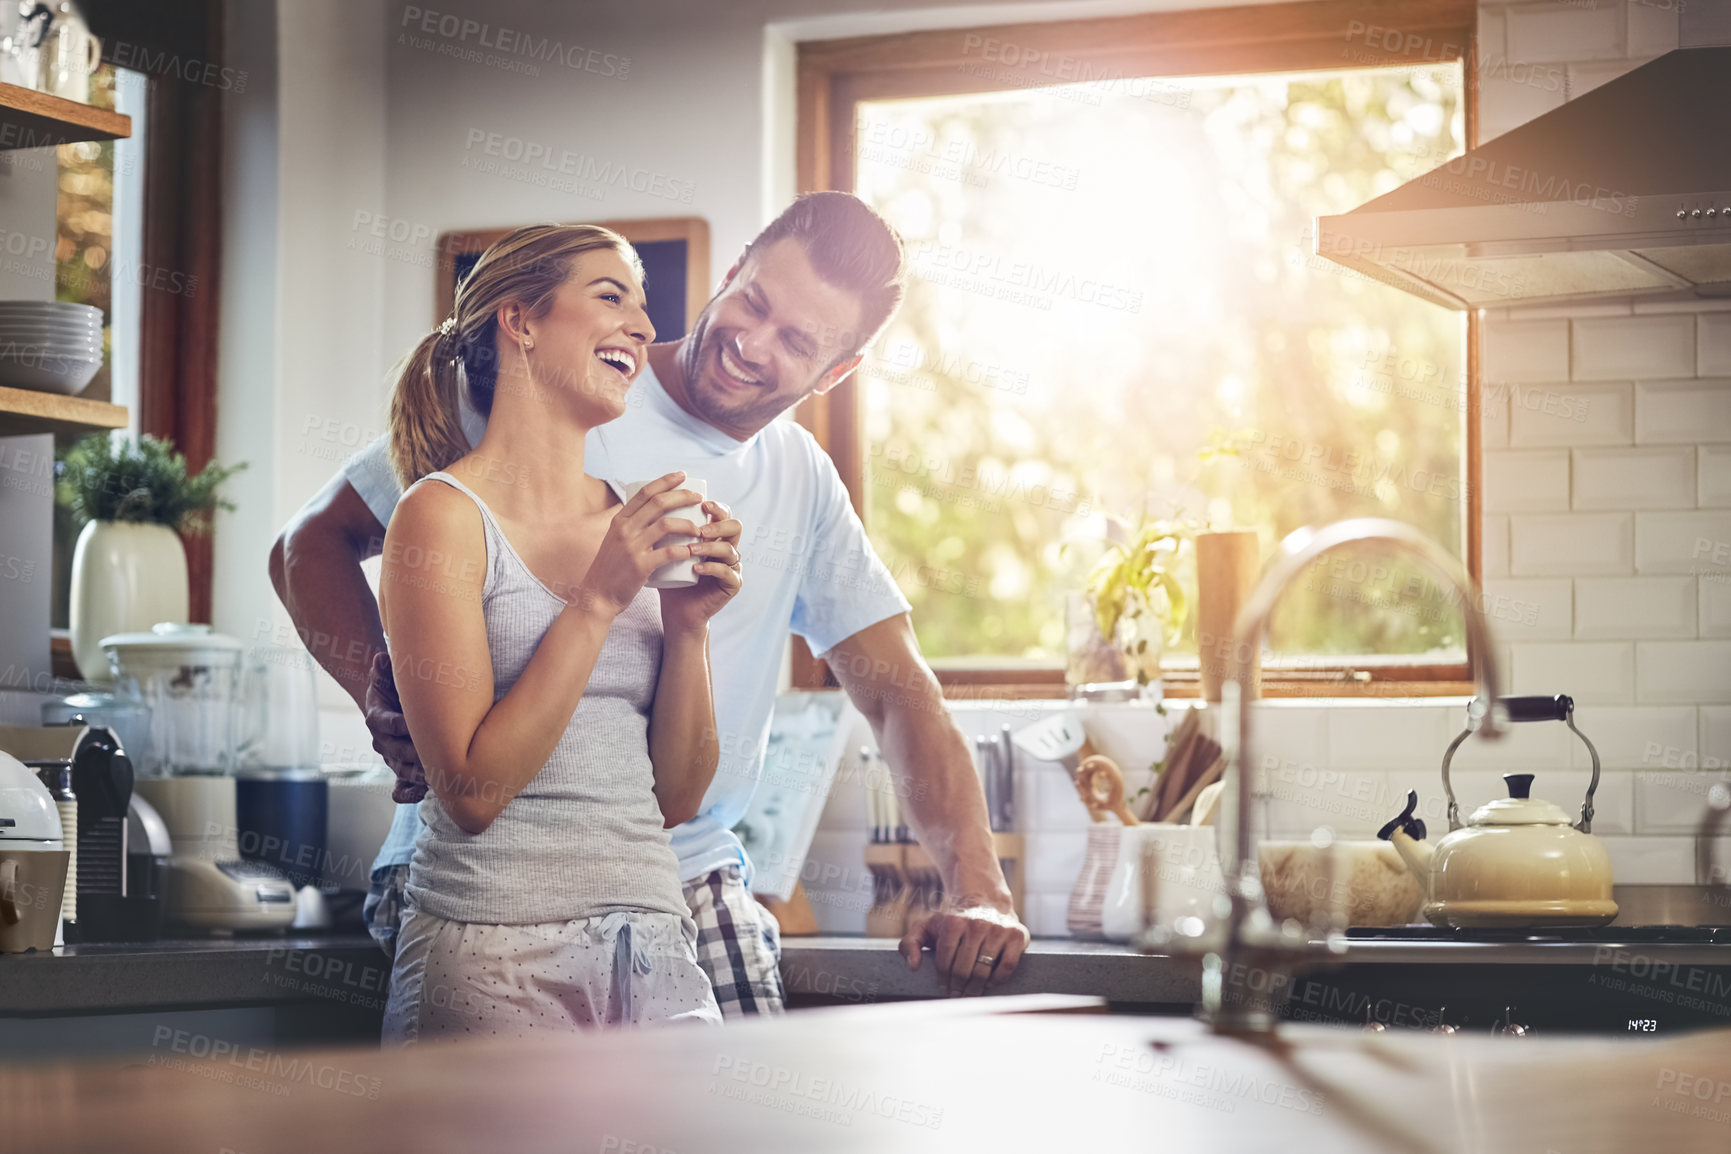 Buy stock photo Shot of a couple standing together in their kitchen